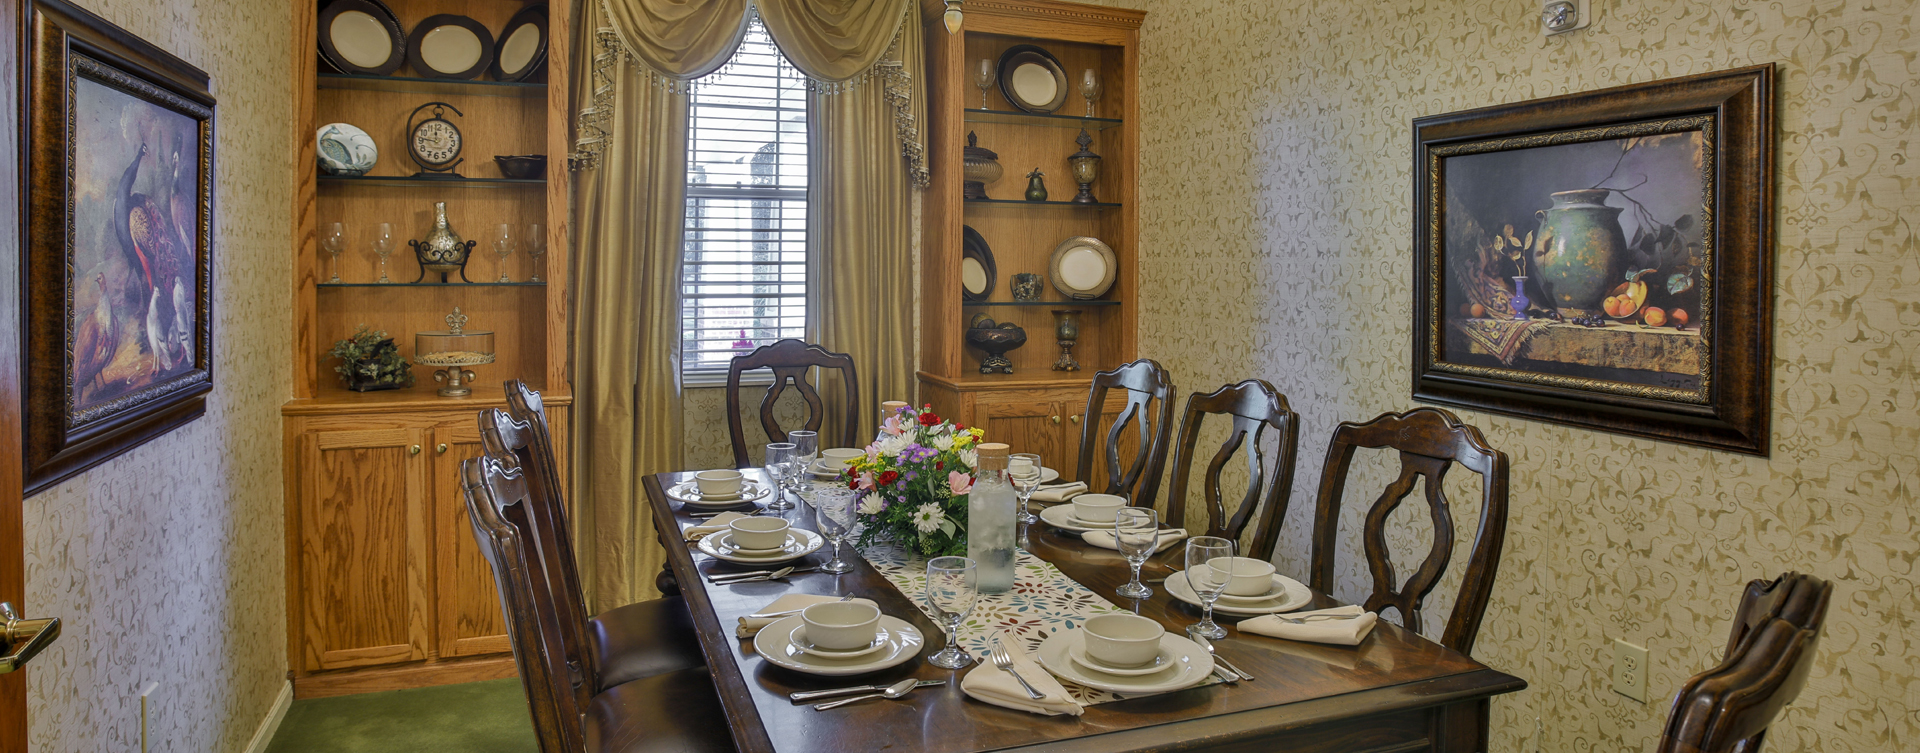 Food is best when shared with family and friends in the private dining room at Bickford of Crawfordsville